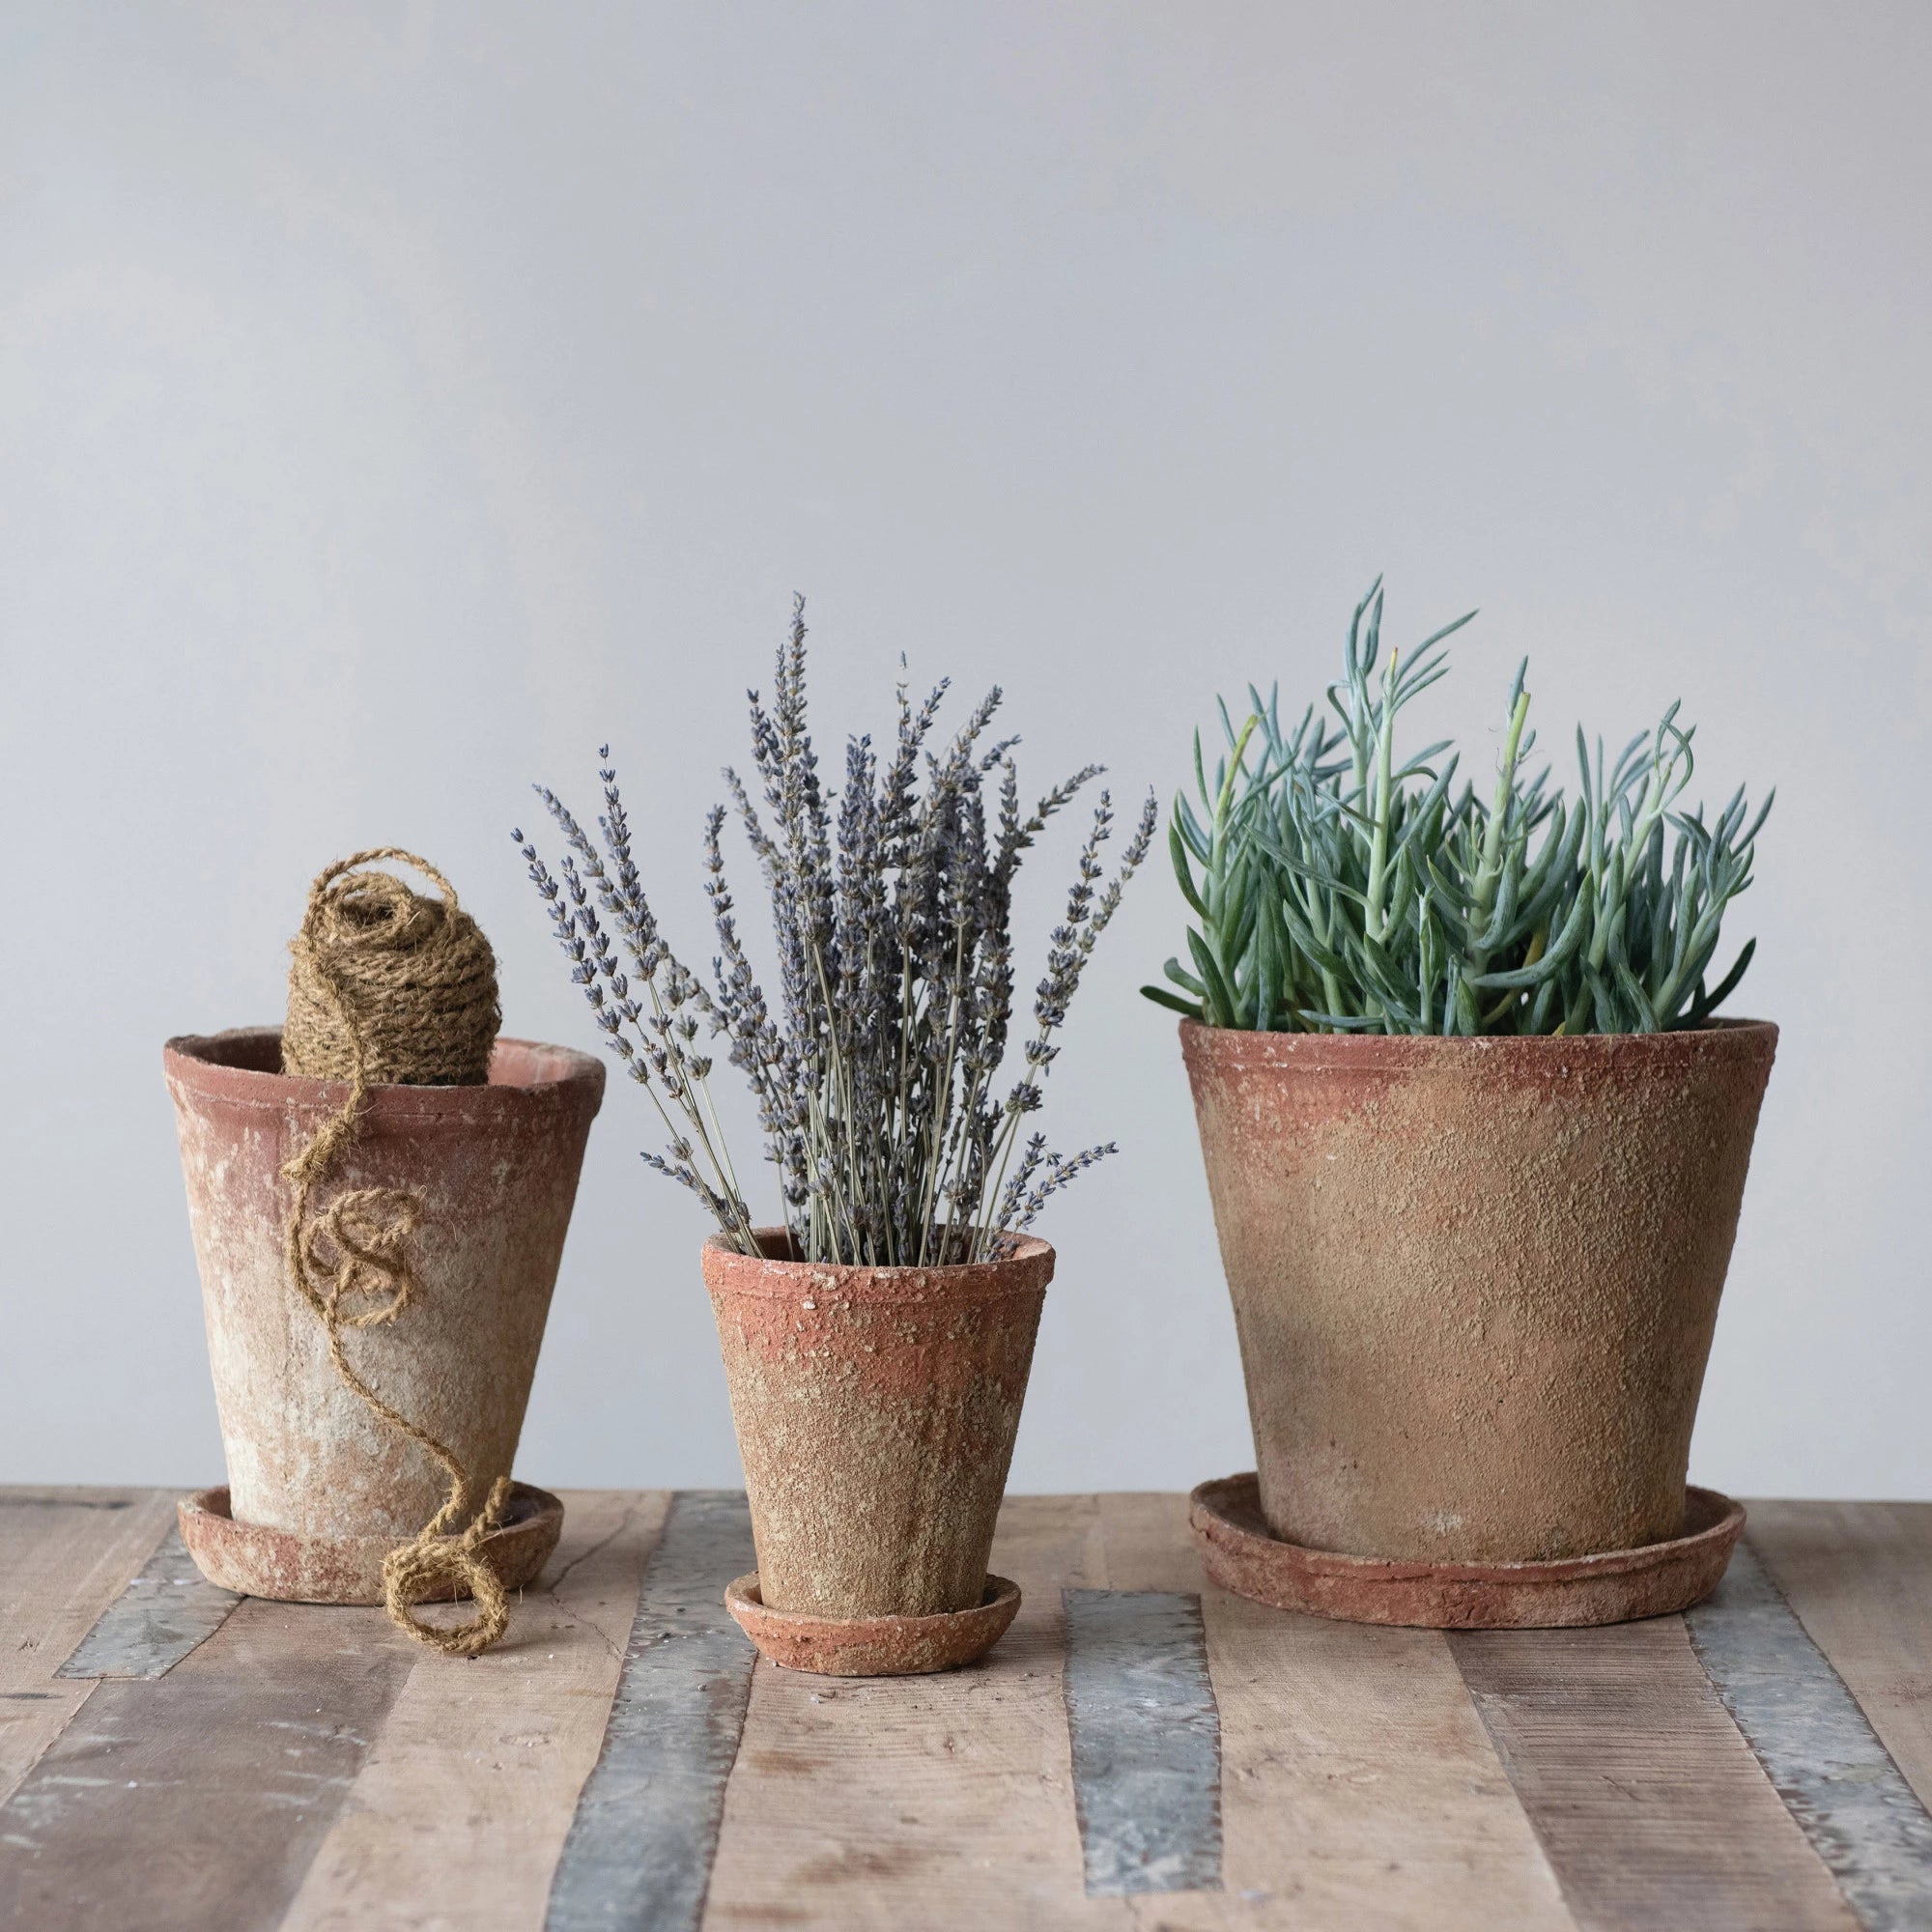 9-1/4"H Distressed Cement Planter with Saucer